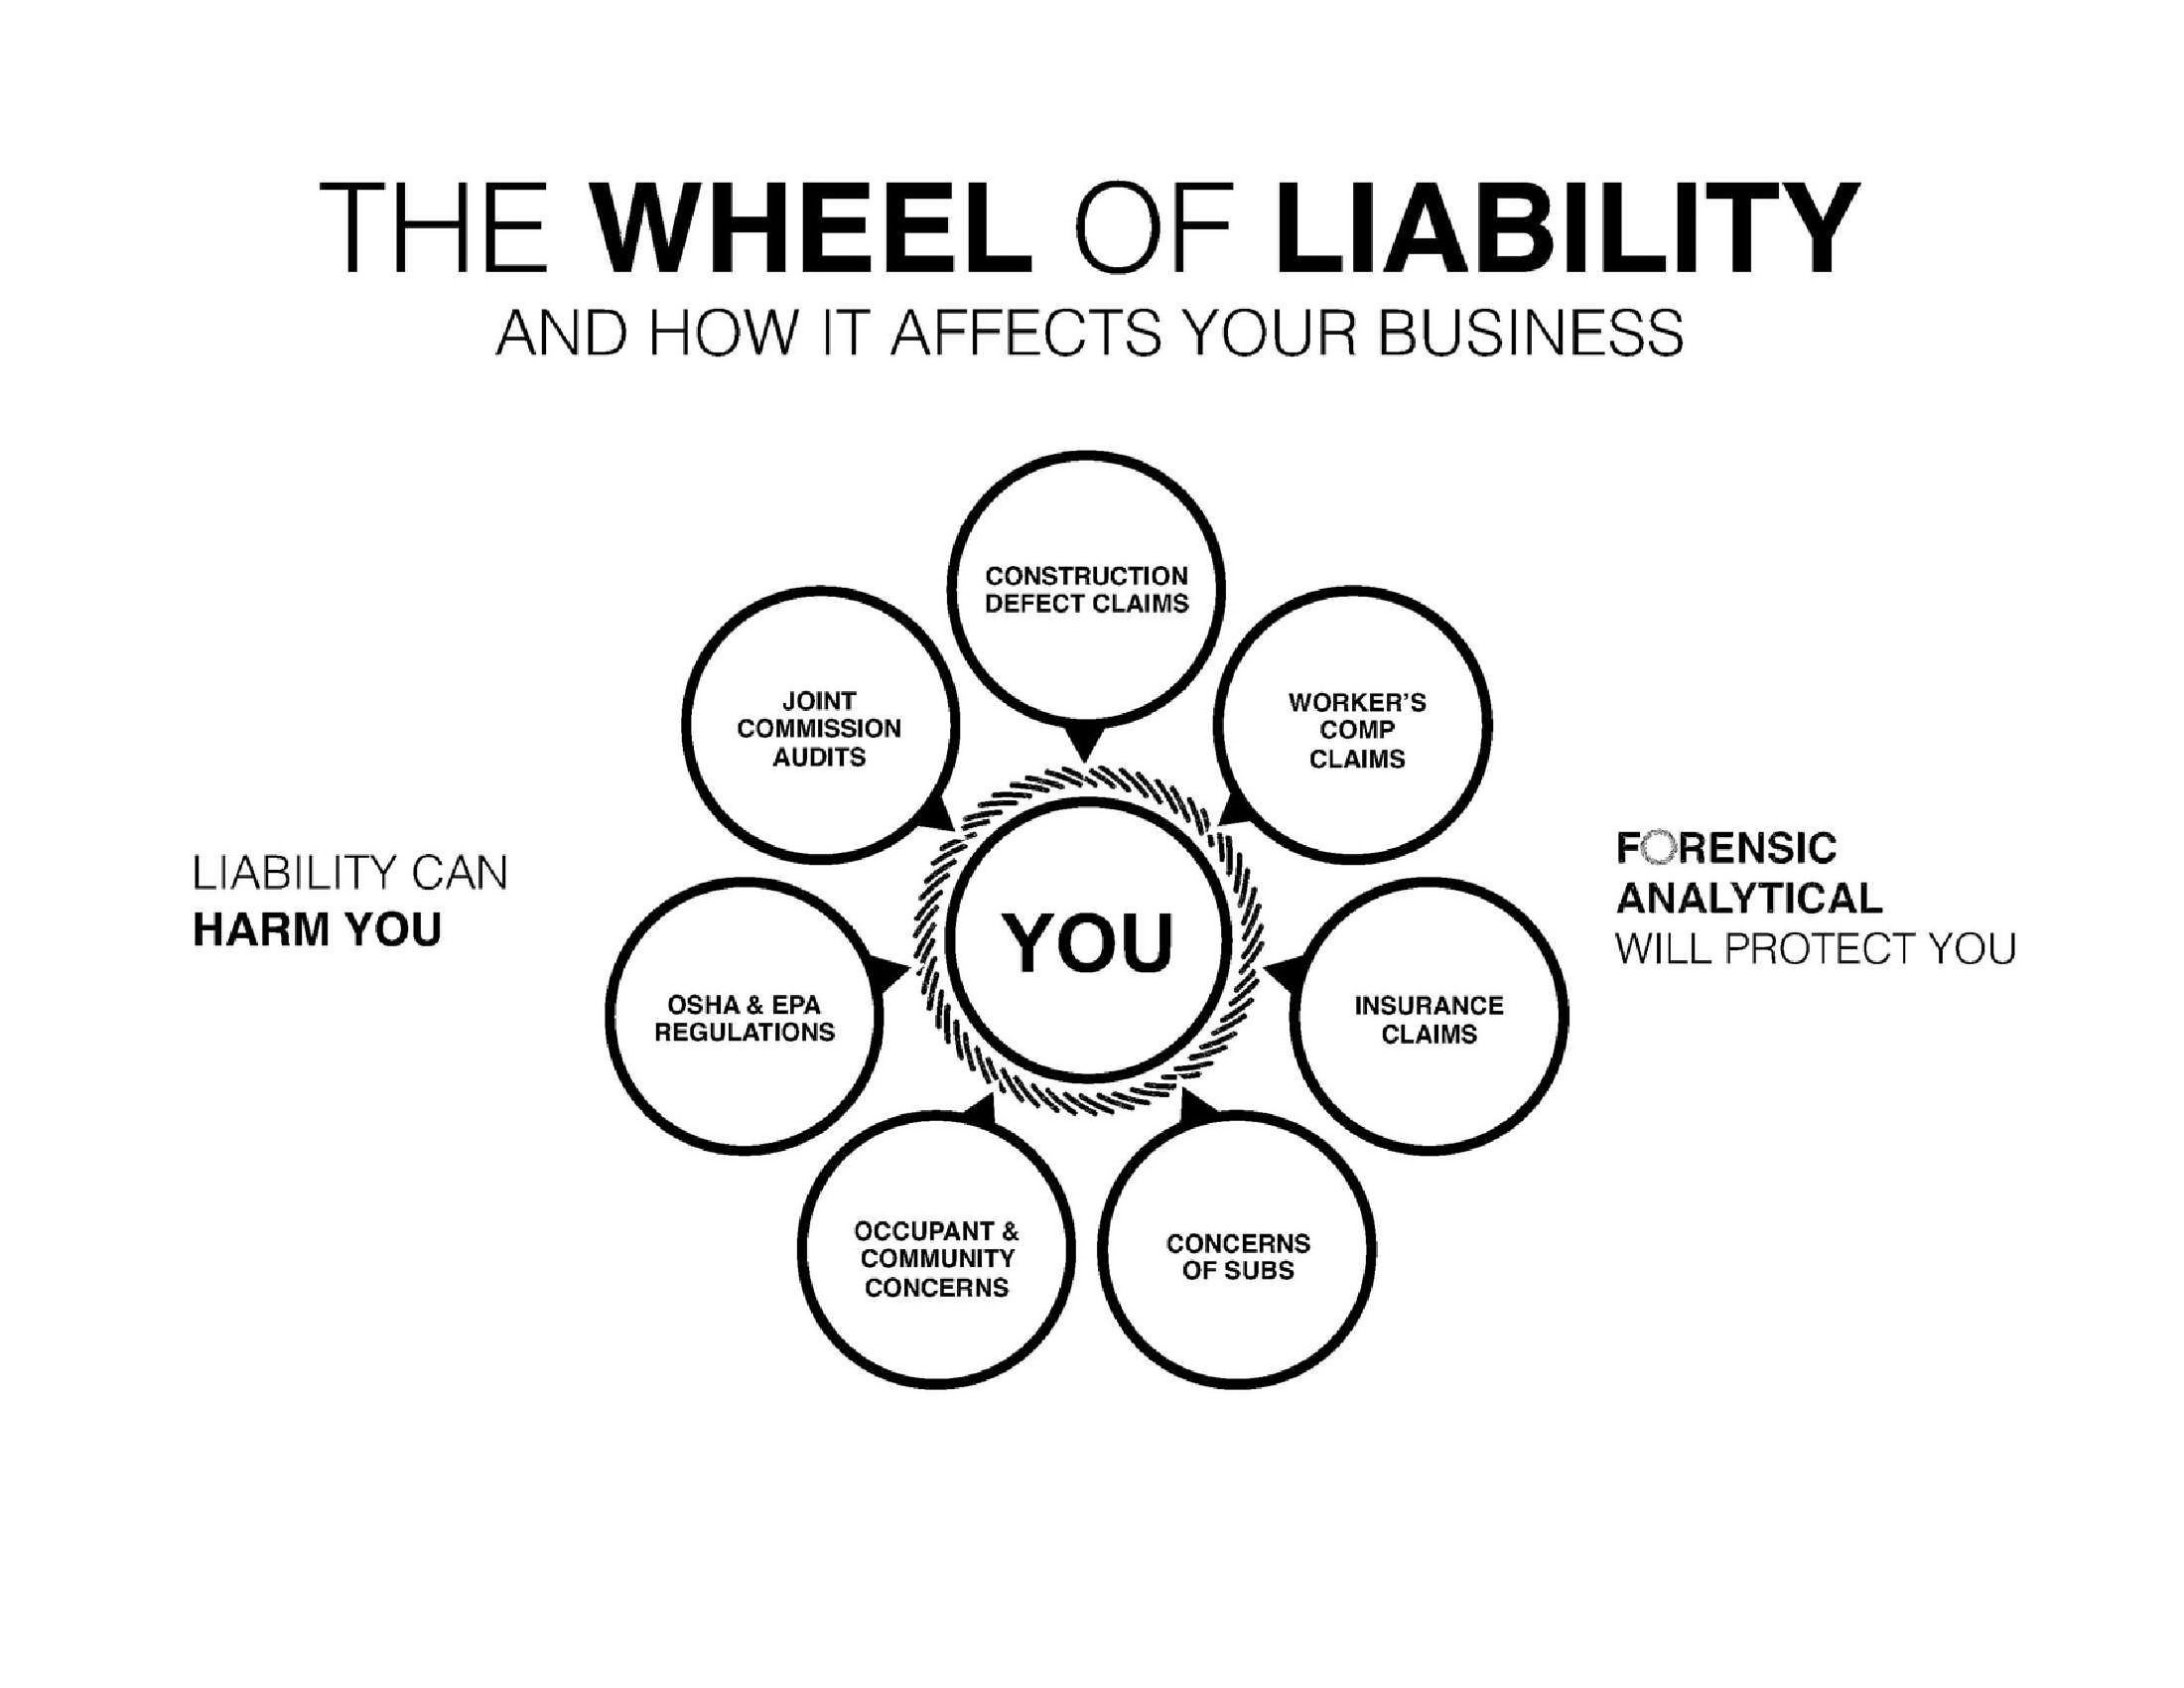  THE WHEEL OF LIABILITY AND HOW IT AFFECTS YOUR BUSINESS LIABILITY CAN HARM YOU CONSTRUCTION DEFECT CLAIMS WORKER'S COMP CLAIMS I